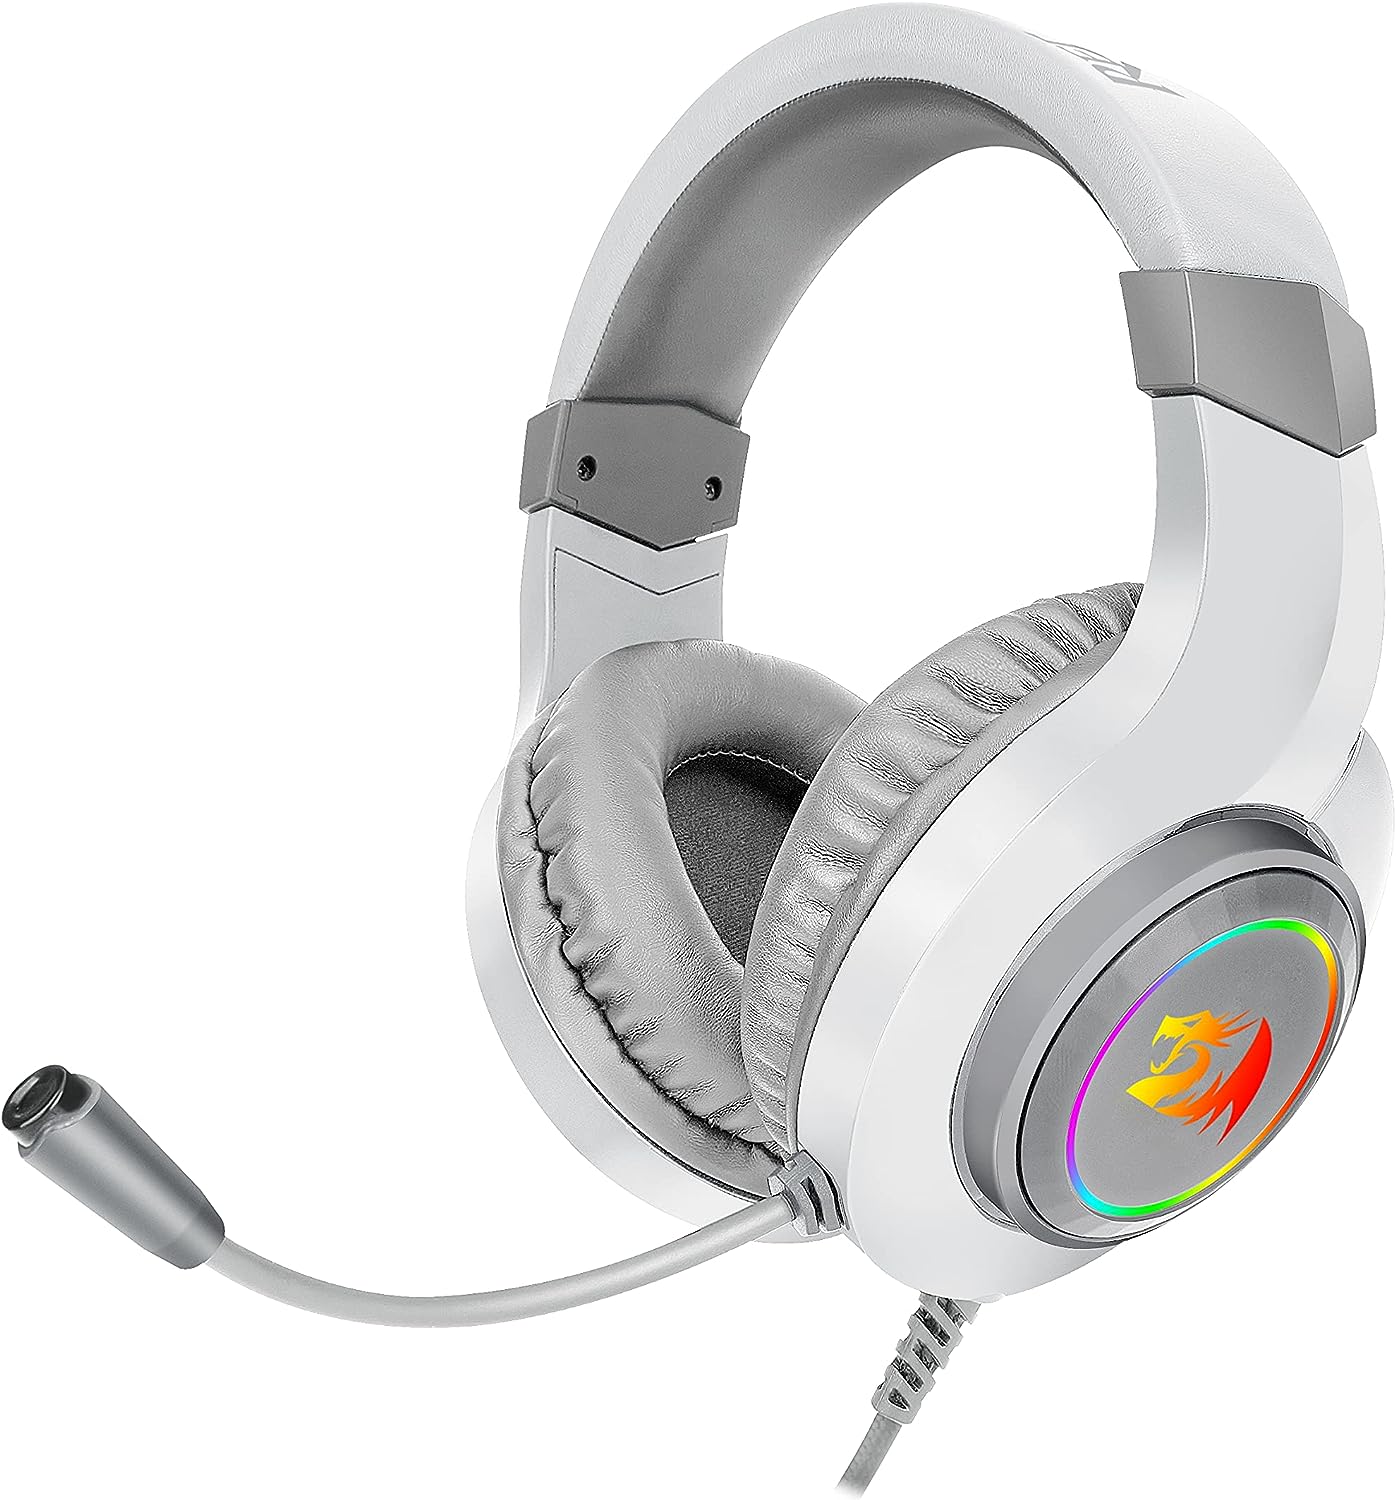 Redragon Hylas H260W RGB Gaming Headset with Microphone, Wired, Compatible with PS4, PS5, PC and Laptops White